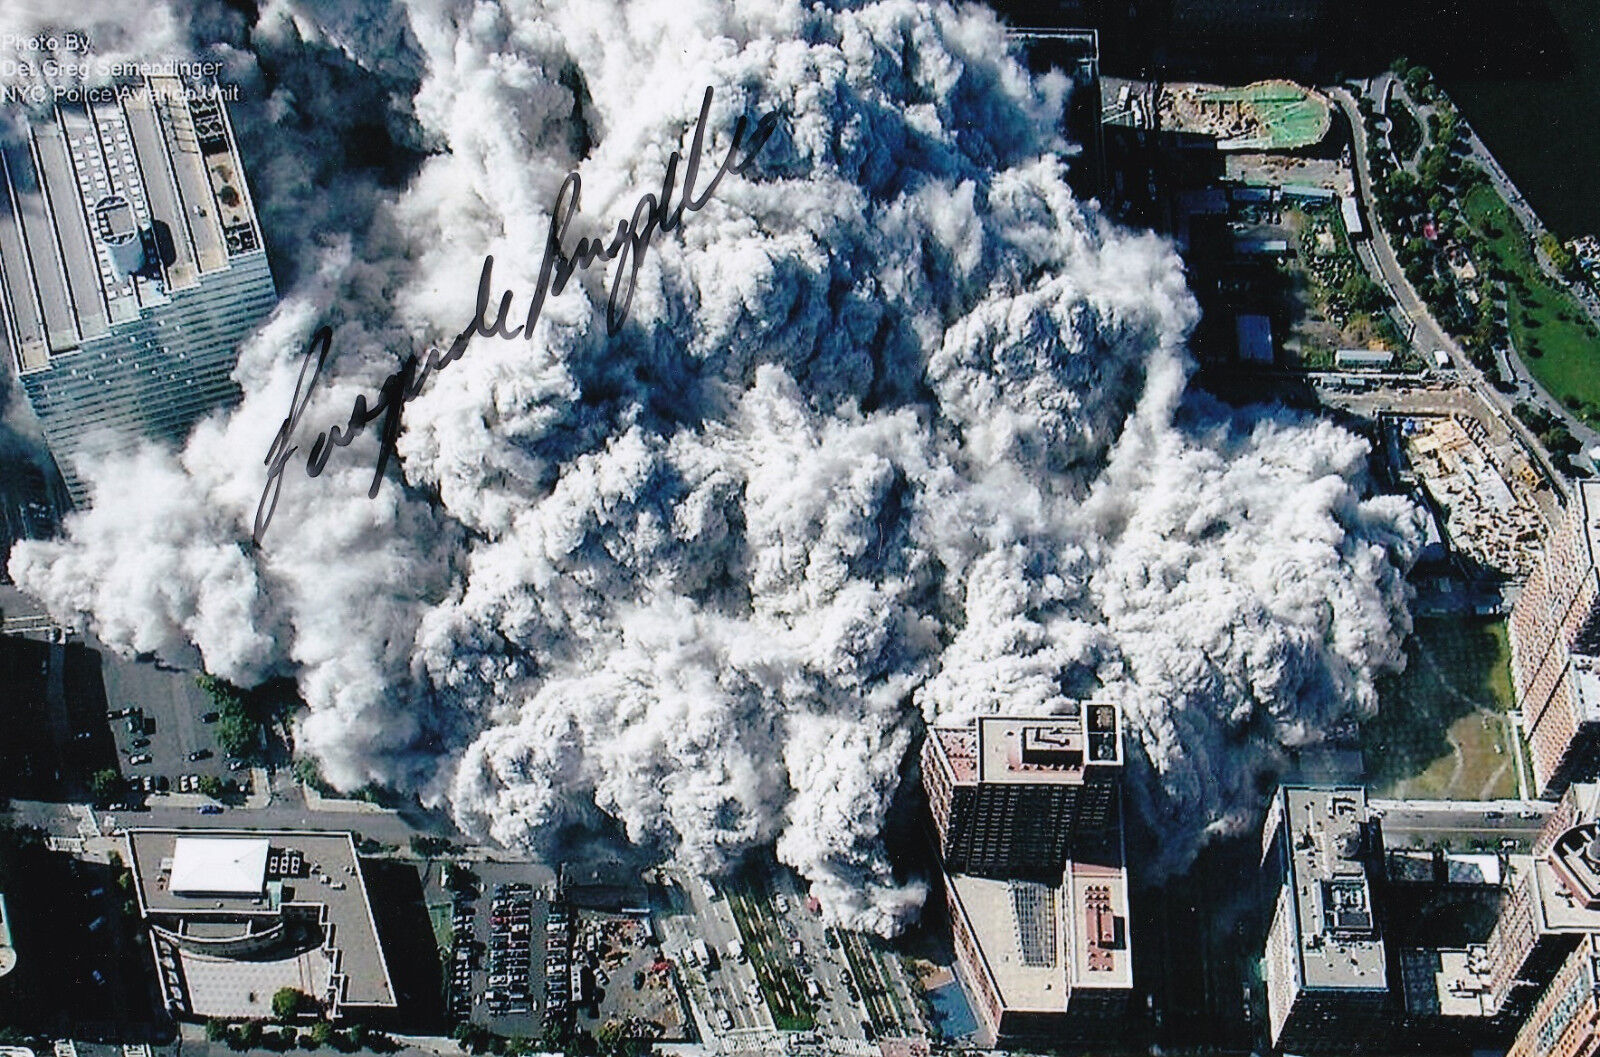 Pasquale Buzzelli Signed 4x6 Inch Photo Poster painting NYC Twin Towers 9/11 Surfer Trade Center